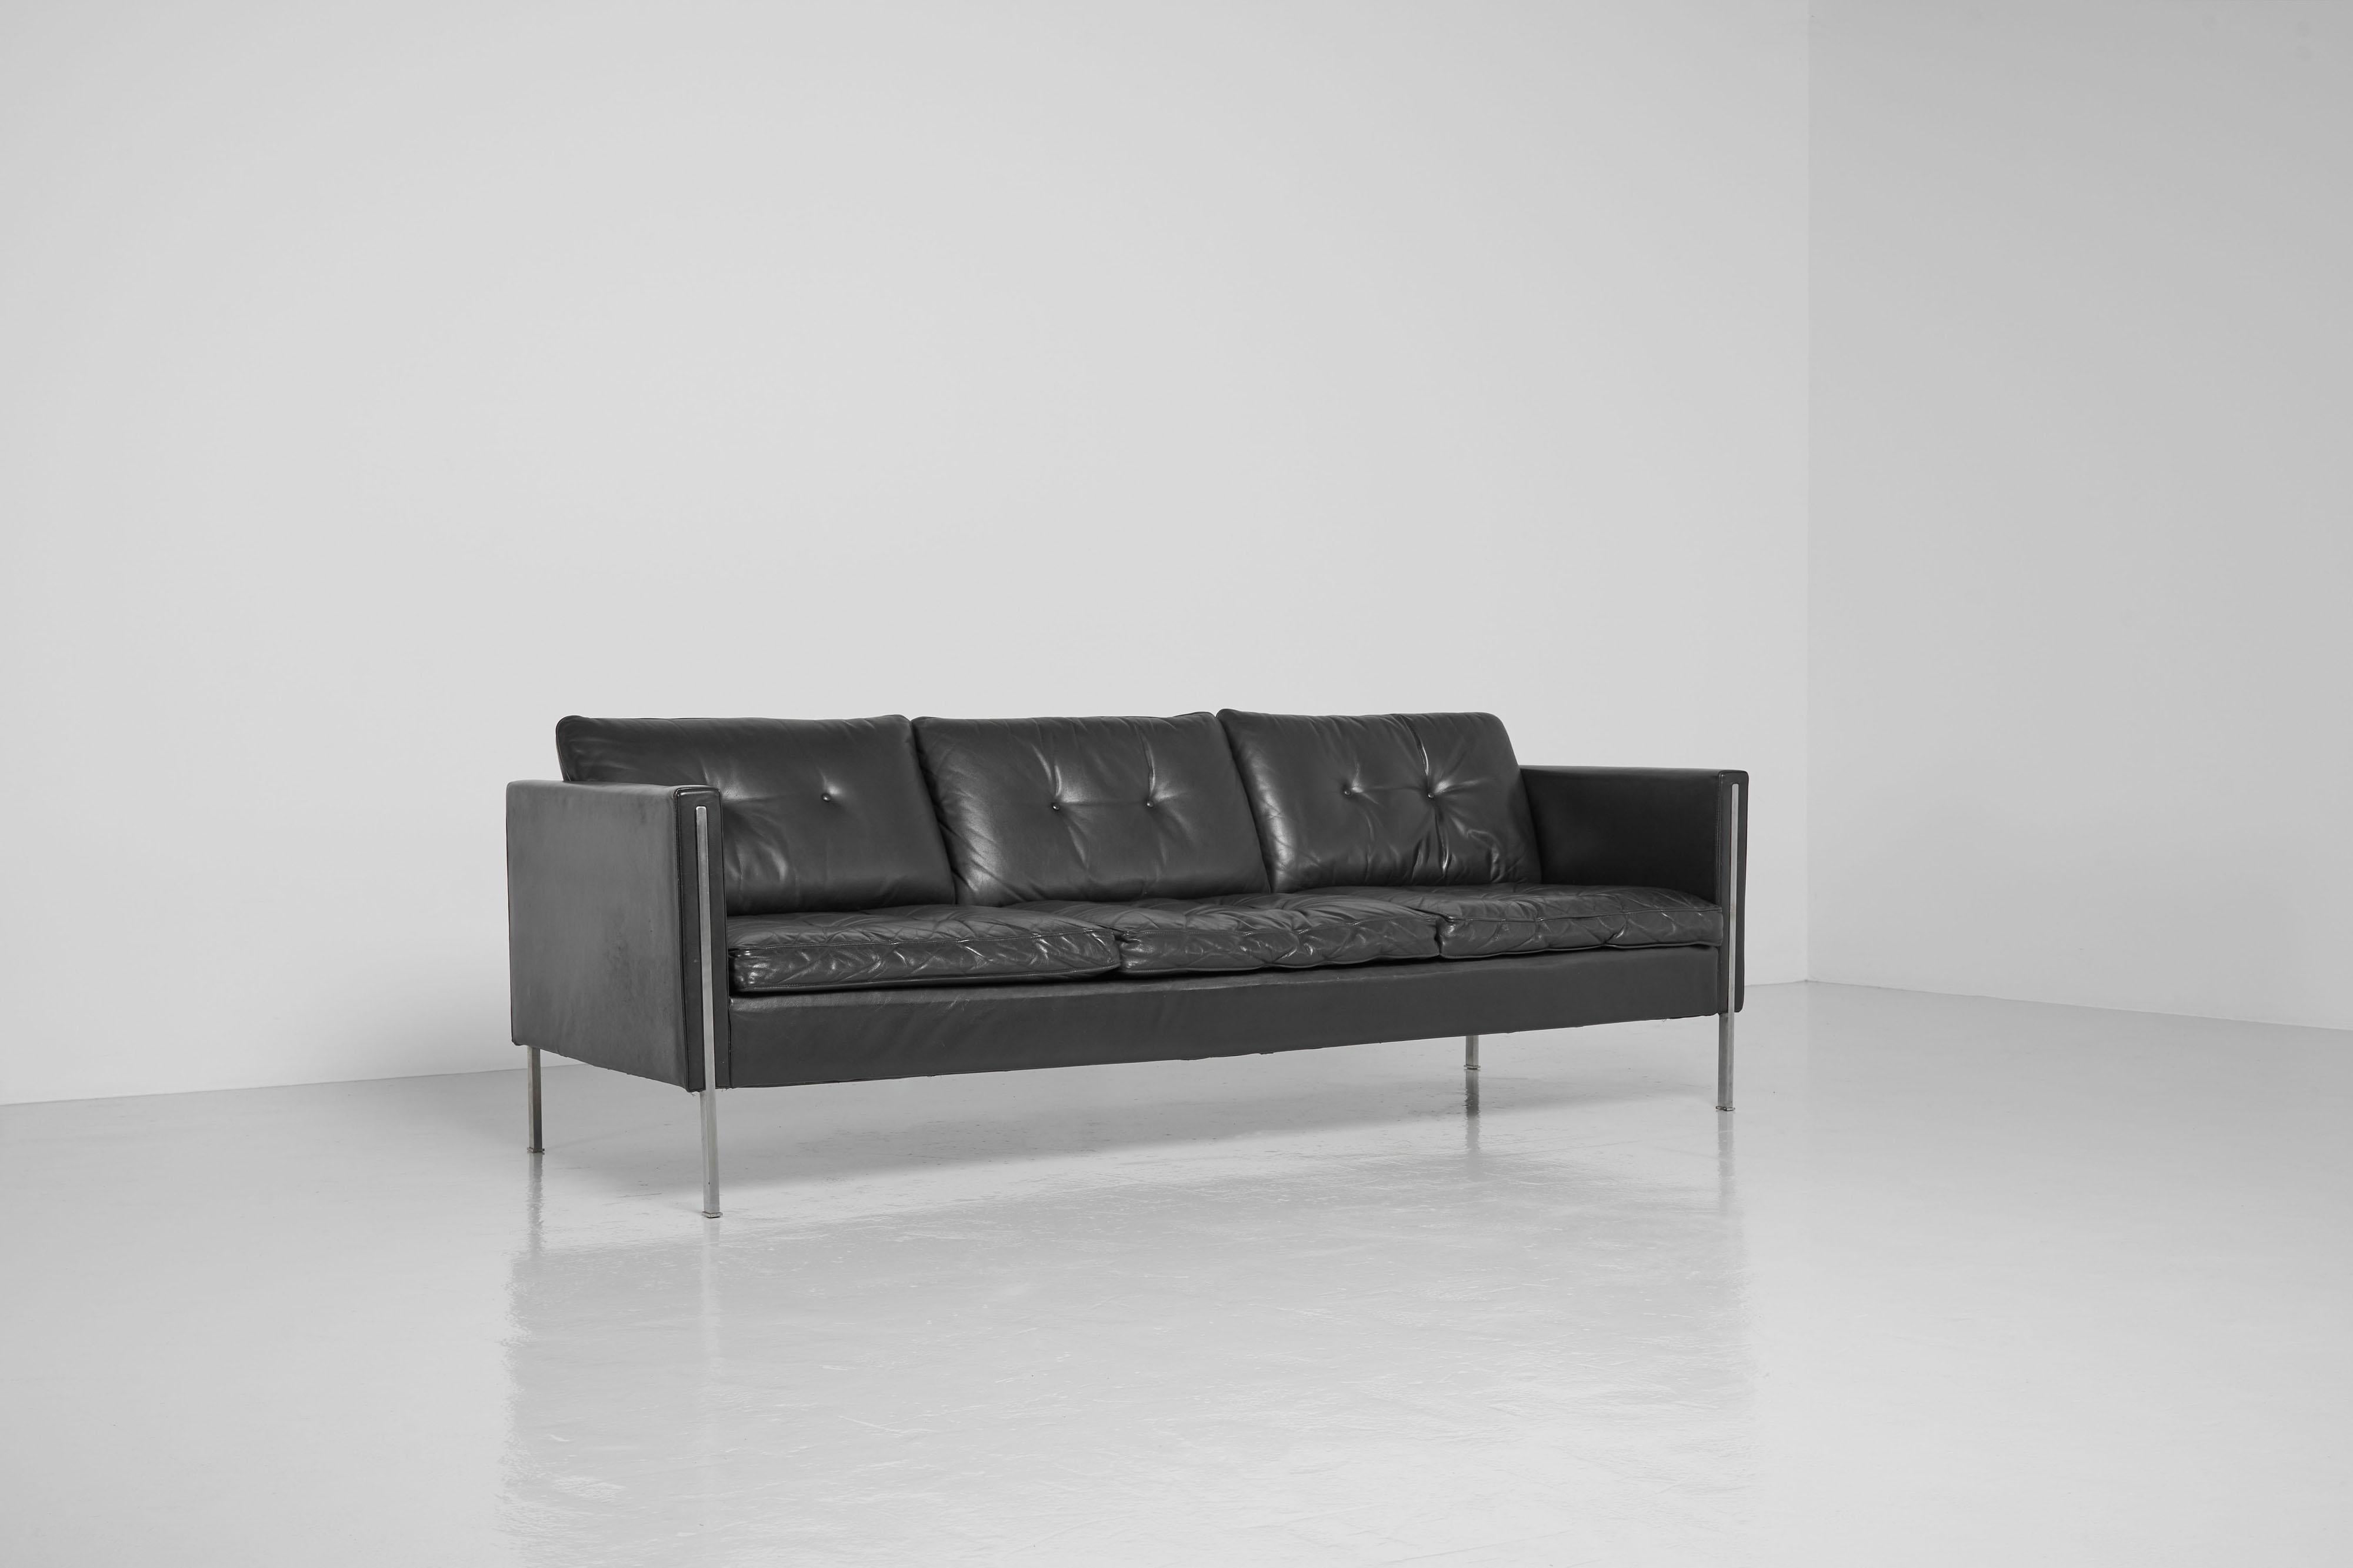 Nice minimalistic model 442/3 sofa designed by Pierre Paulin and manufactured by Artifort, The Netherlands 1962. This is for a three-seater sofa model 442/3 which is the largest from these series, a sofa in quality black leather and matt chrome